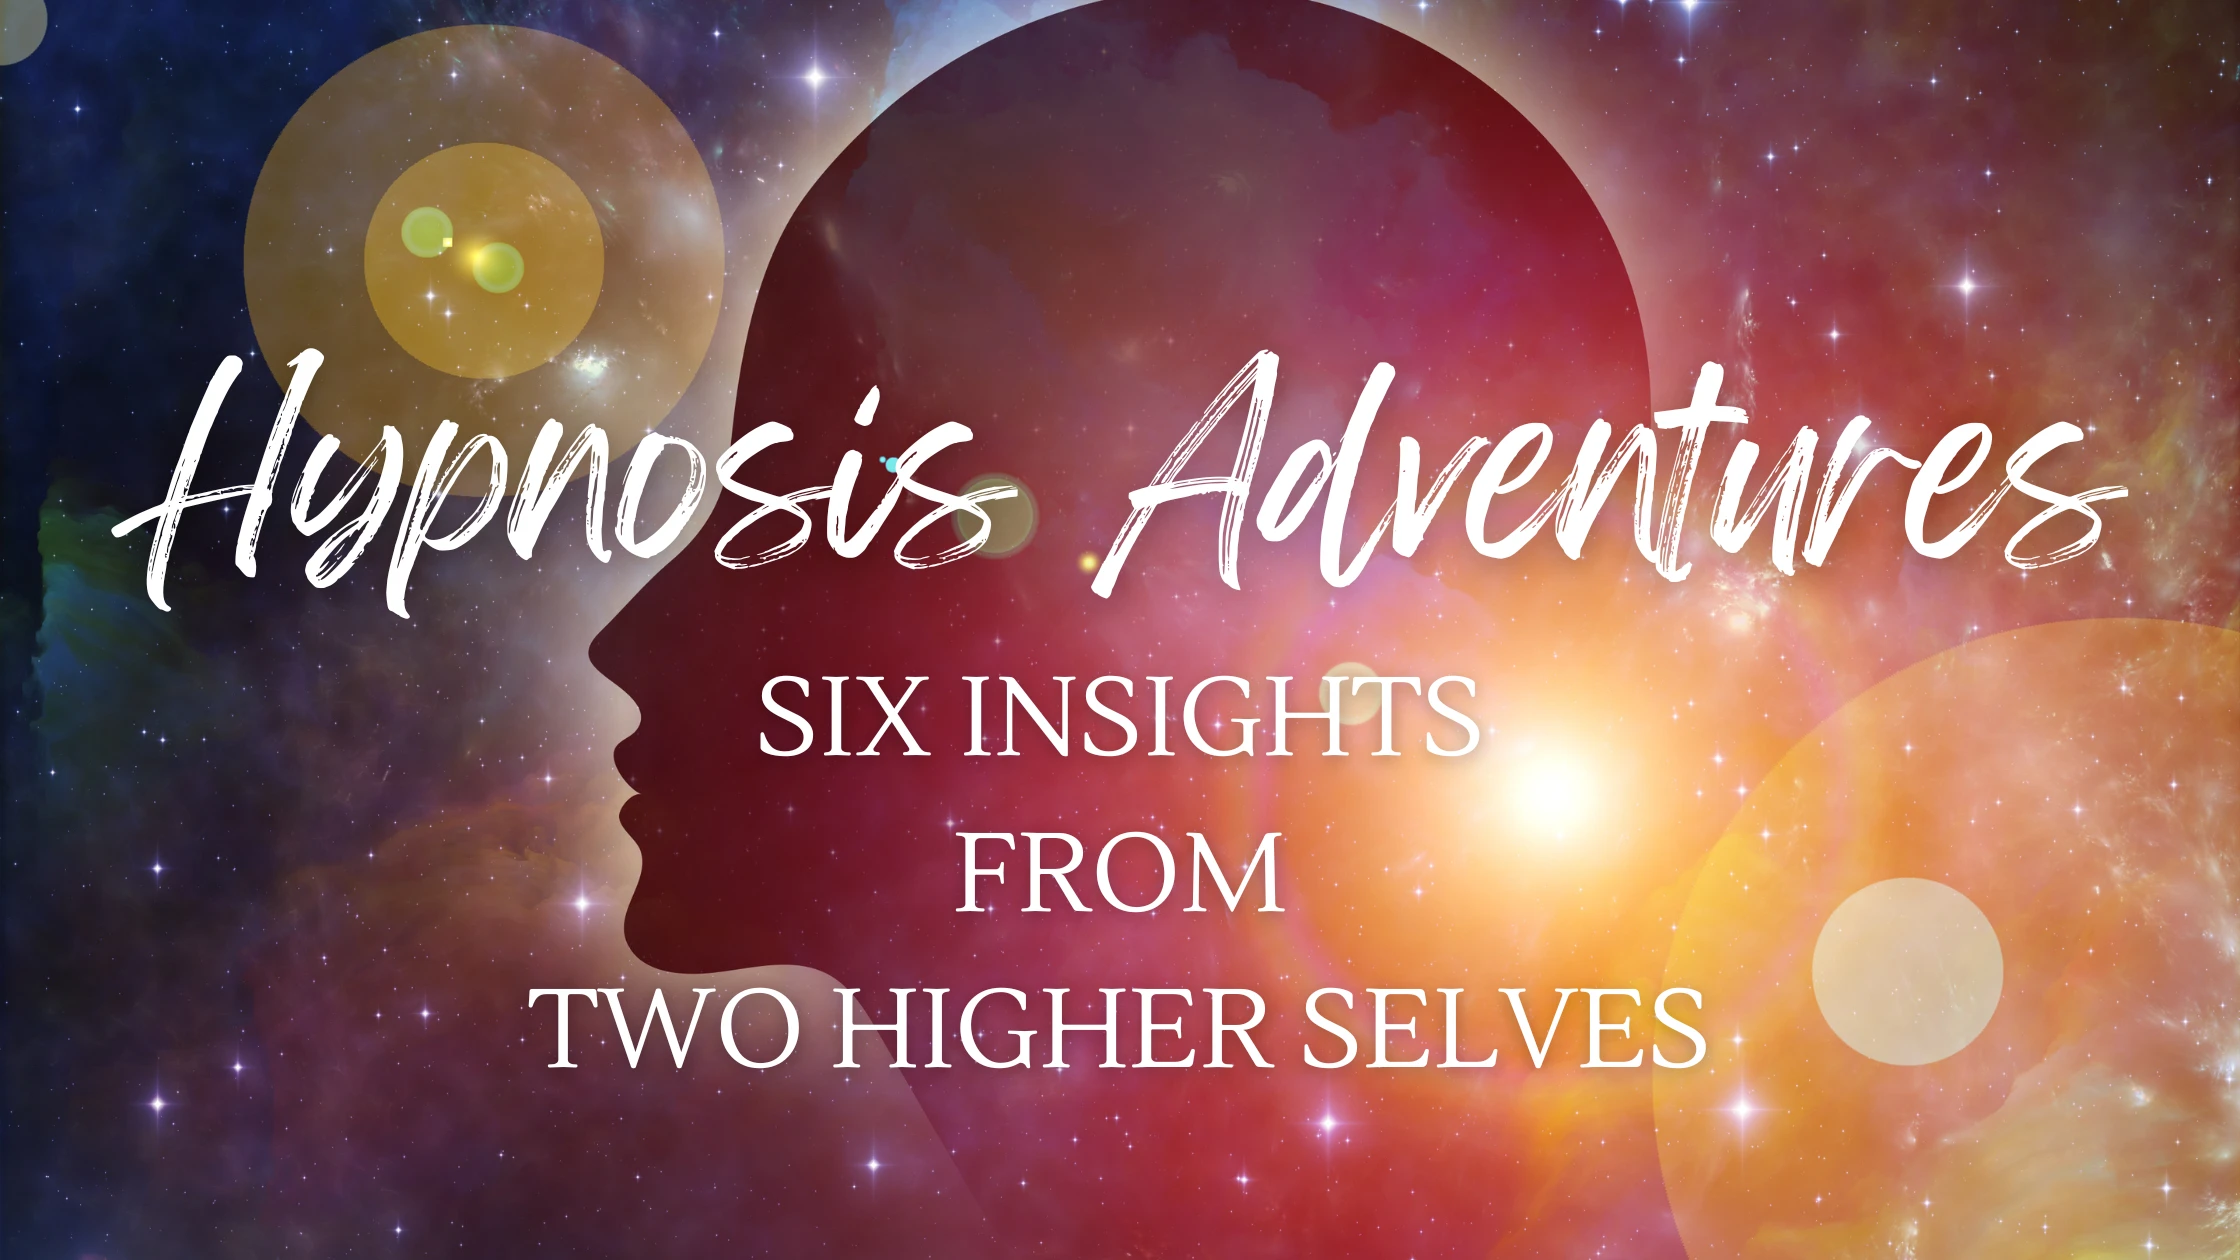 Hypnosis Adventures: 6 Insights from 2 Higher Selves